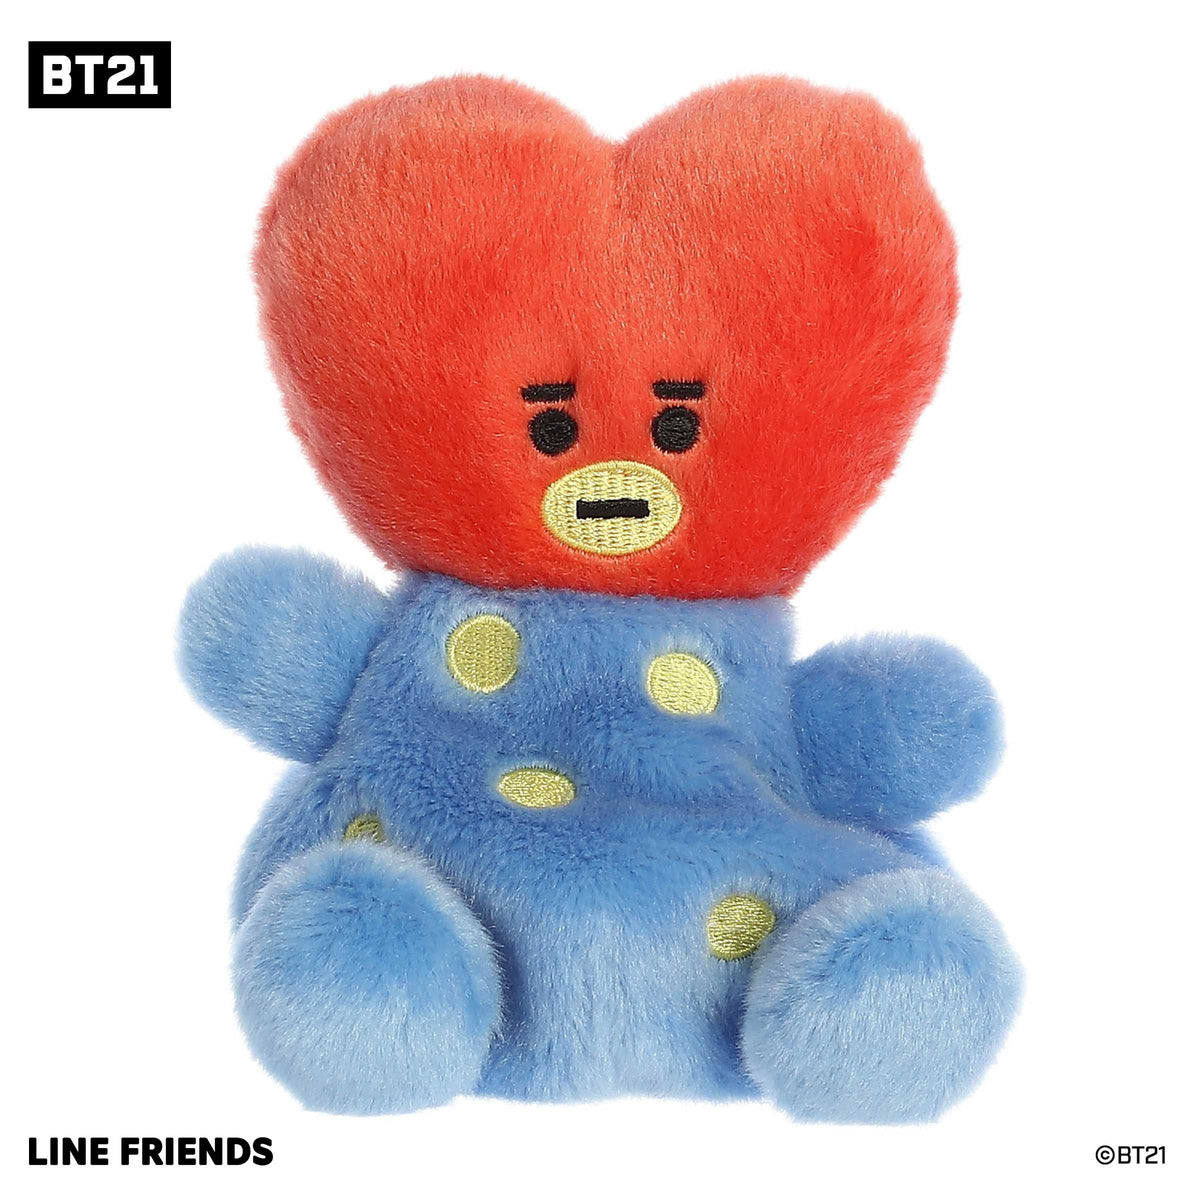 Adorable mini BT21 plush toy with a fluffy heart shaped red color head with black accents and a blue body with yellow accents